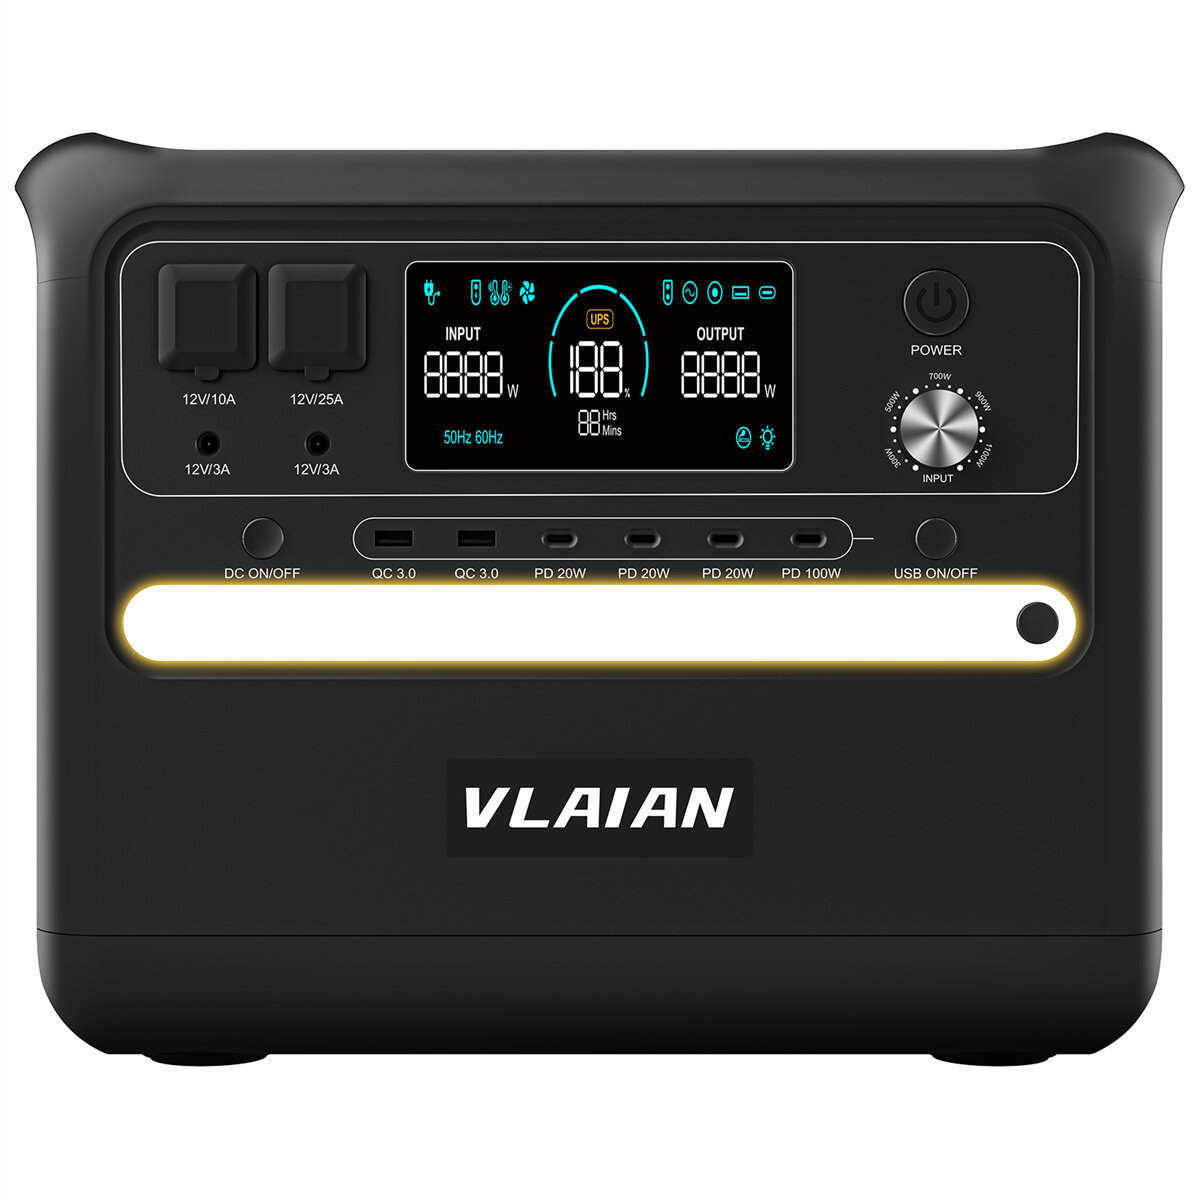 [EU Direct] VLAIAN S2400 2400W AC Output Portable Power Station 2048Wh LiFePo4 Solar Generator, UPS Power Supply, Pure Sine Wave, MPPT Control, Backup Power Supply for Camping / Overnight in Car / Outdoors Disaster Goods/Emergency Use